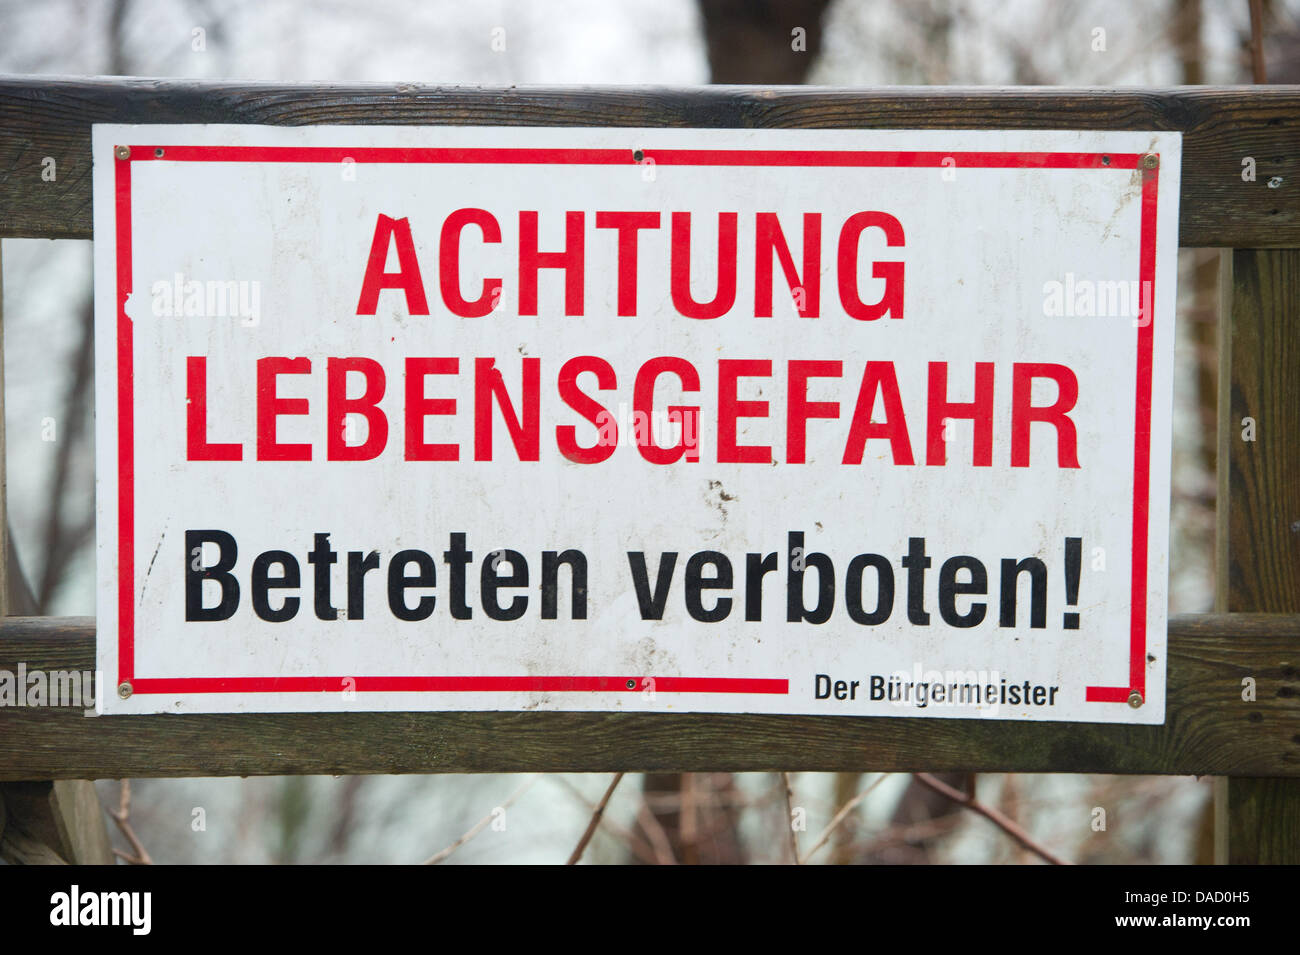 A sign which reads 'Achtung Lebensgefahr, Betreten verboten!', Attention, danger to life, keep off the ground!' on the access pathway to the steep cliff line at Cape Arkona on the island of Ruegen, Putgarten, Germany, 28 December 2011. On Monday afternoon, 26 December 2011, several thousand cubic metres of clay and chalkstone crashed into the sea taking by surprise a mother and her Stock Photo